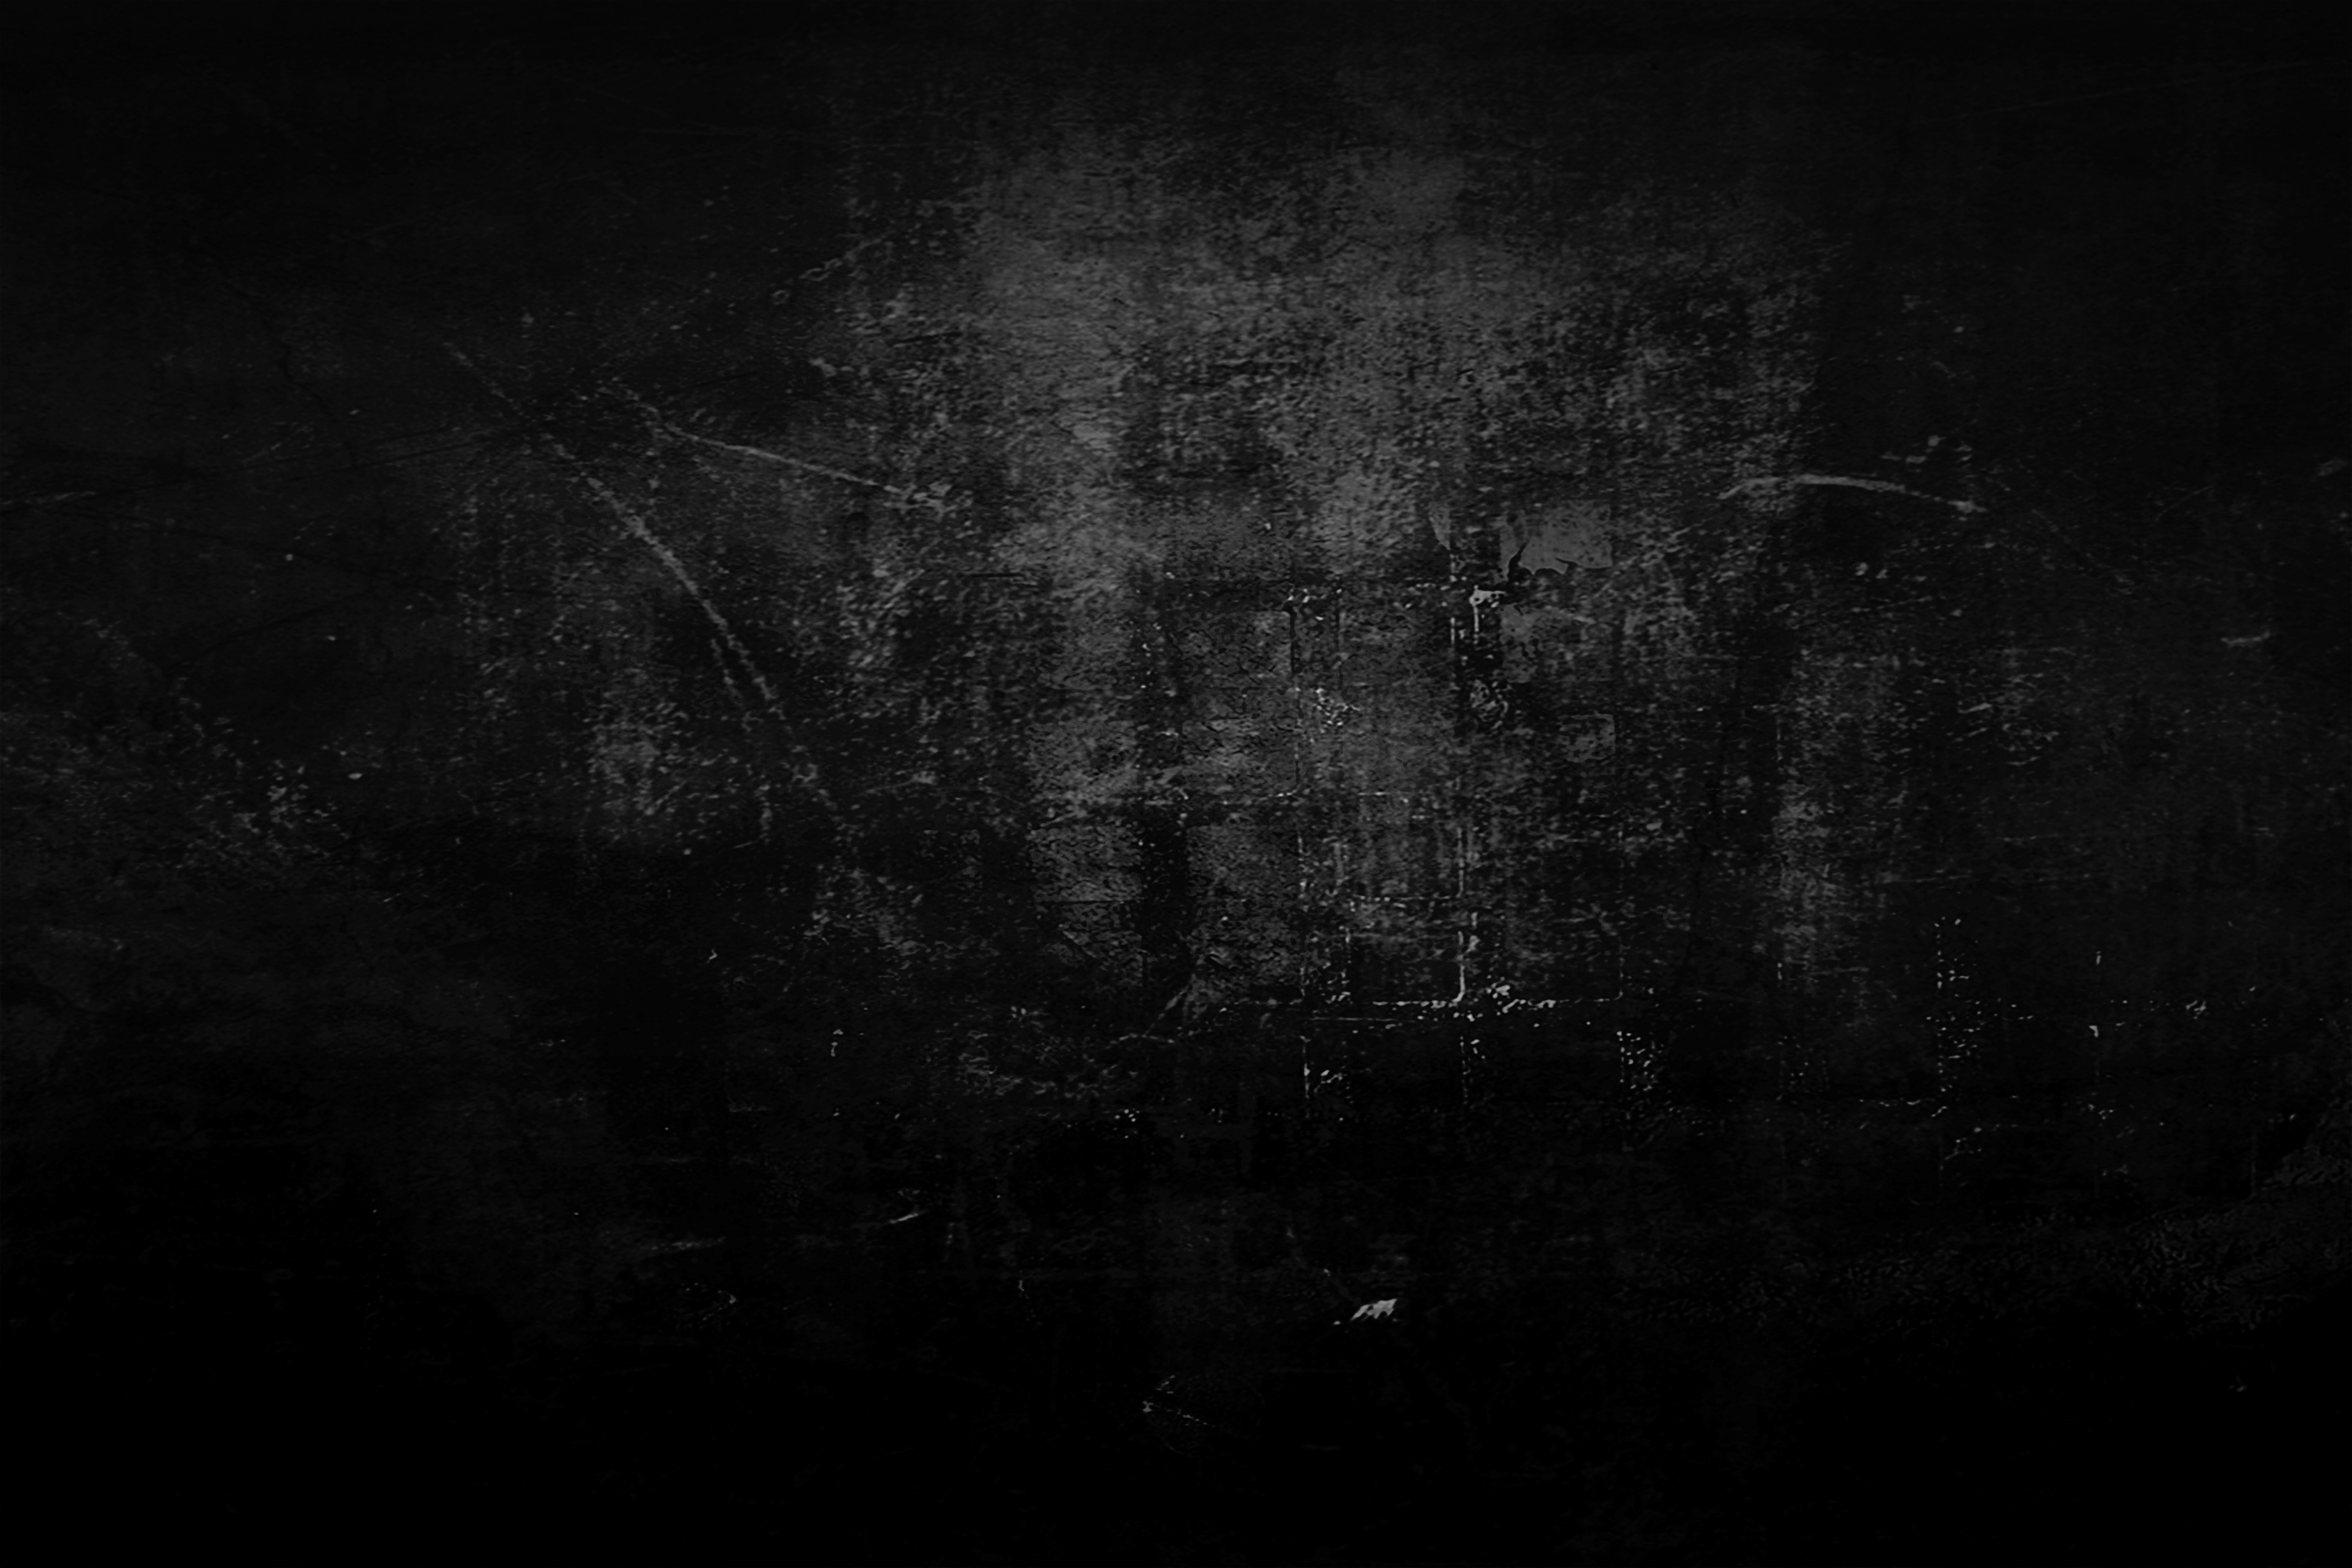 Dark Grunge Textures Taken From Other Image Converted To Black